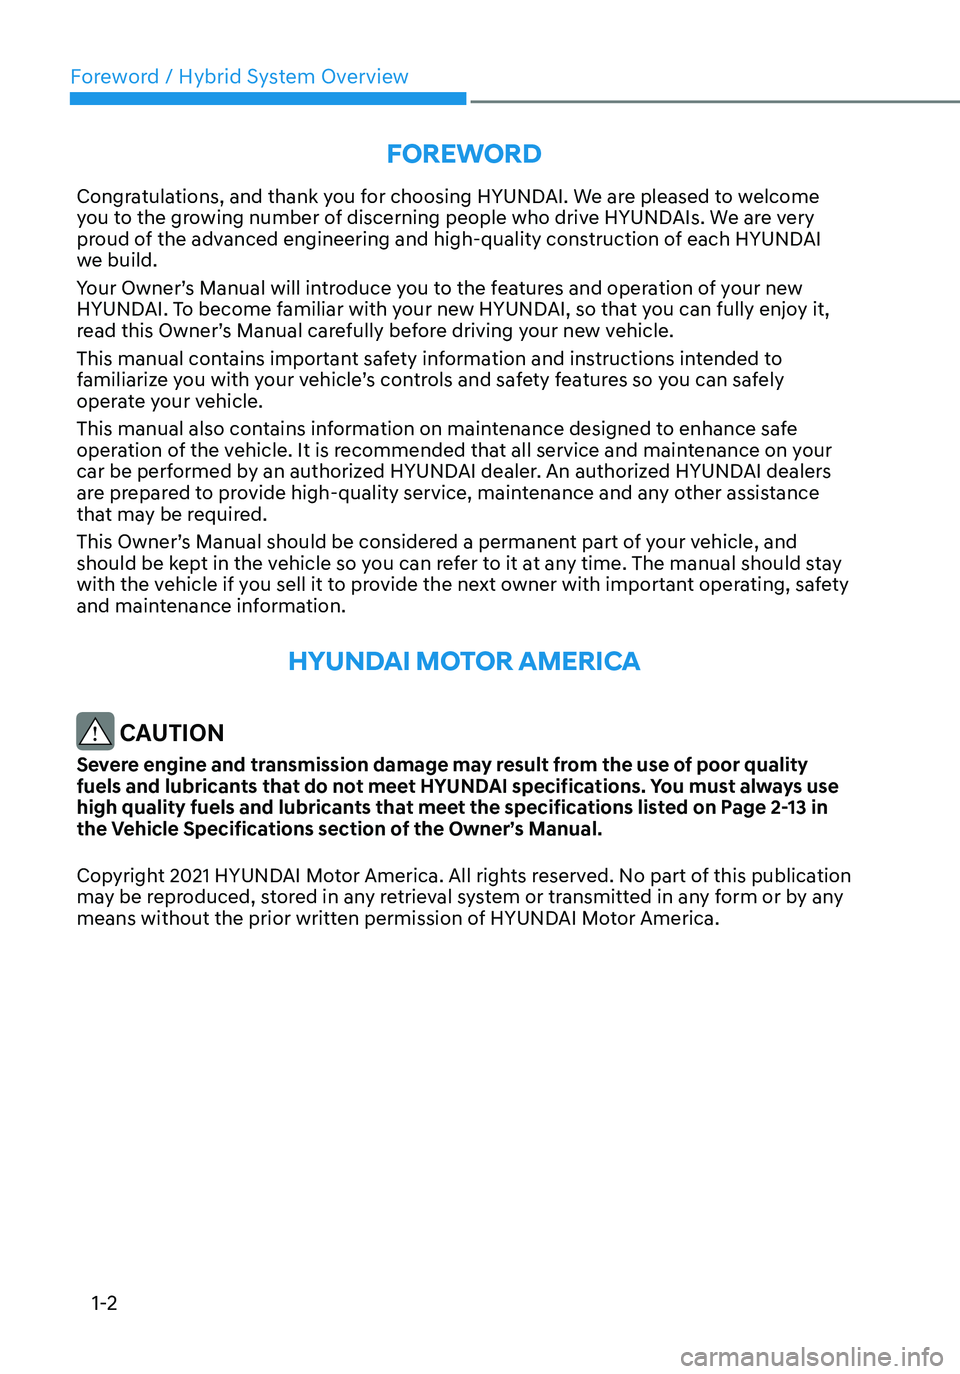 HYUNDAI TUCSON HYBRID 2022  Owners Manual Foreword / Hybrid System Overview
1-2
FOREWORD
Congratulations, and thank you for choosing HYUNDAI. We are pleased to welcome 
you to the growing number of discerning people who drive HYUNDAIs. We are